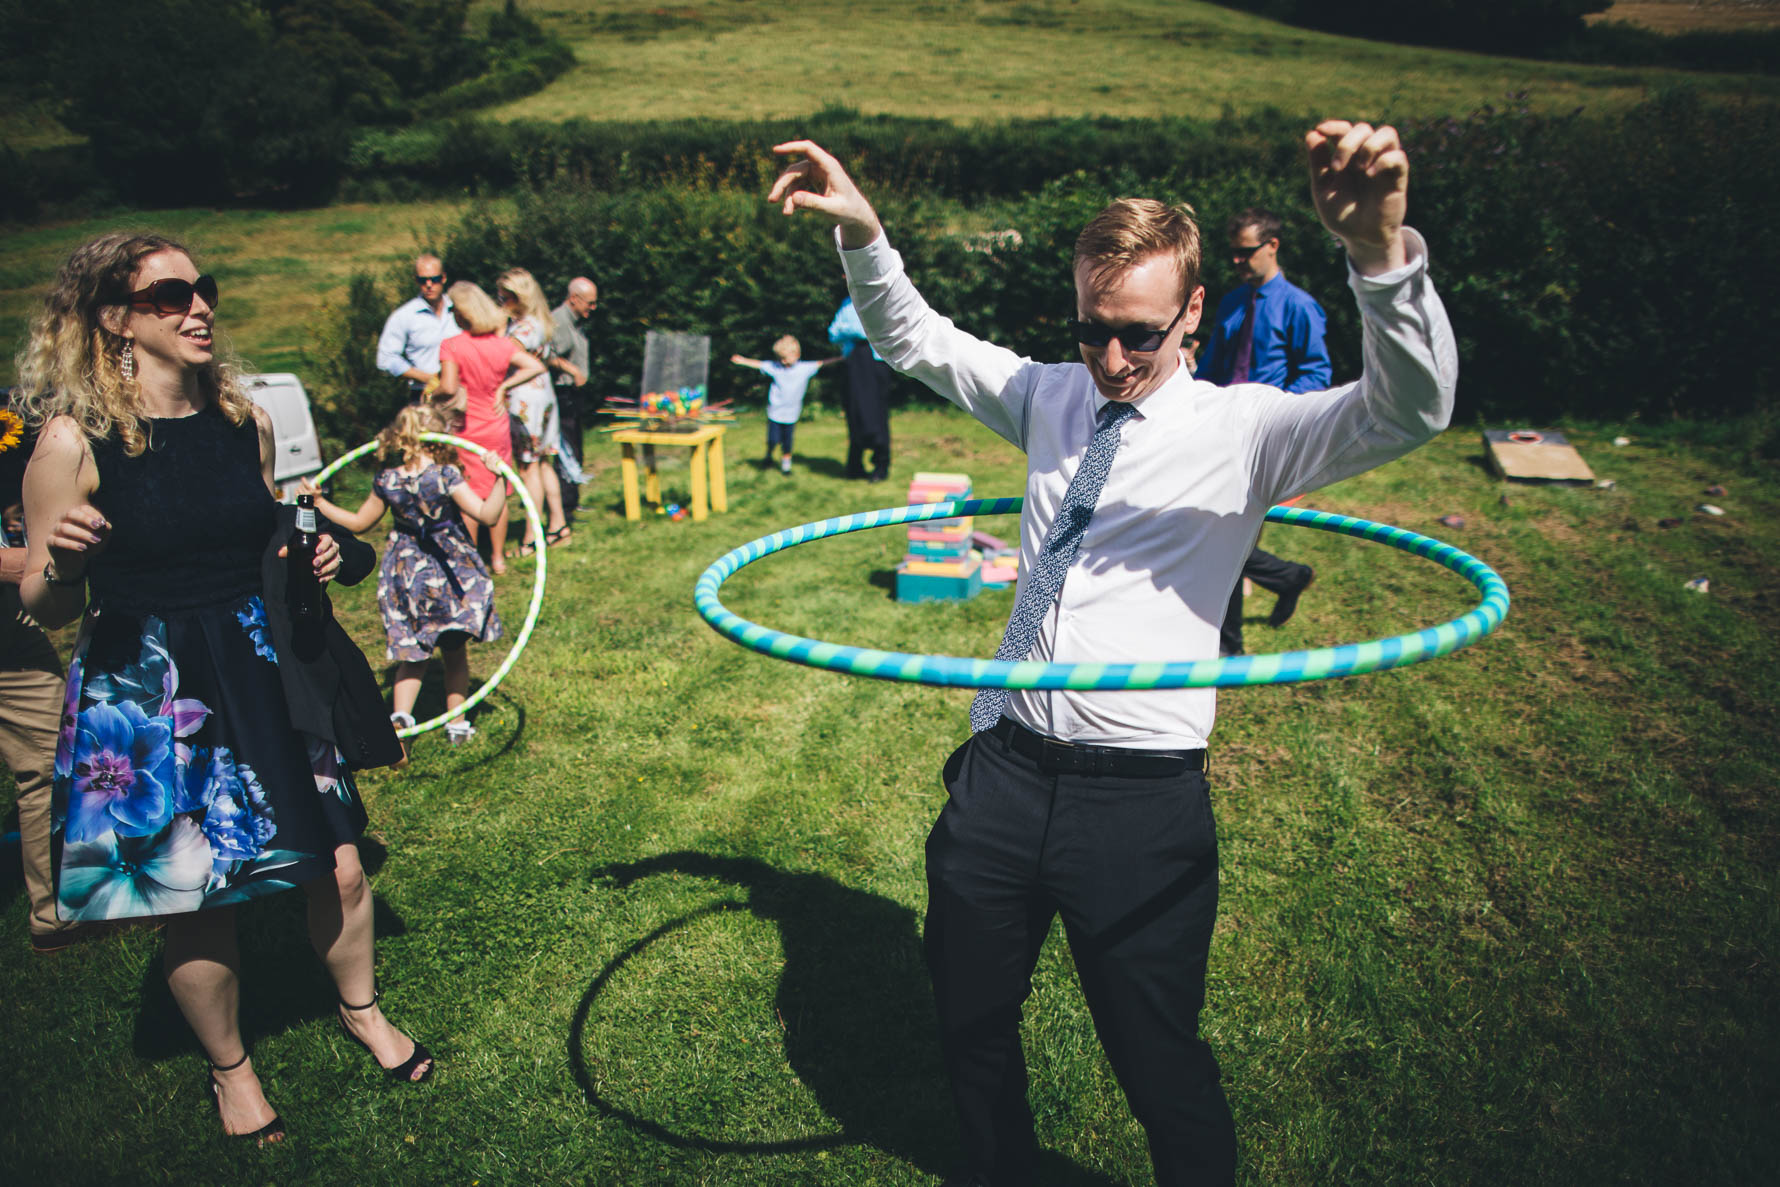 Man wearing a shirt and tie and sunglasses stood on a lawn rotating a hula hoop around his chest